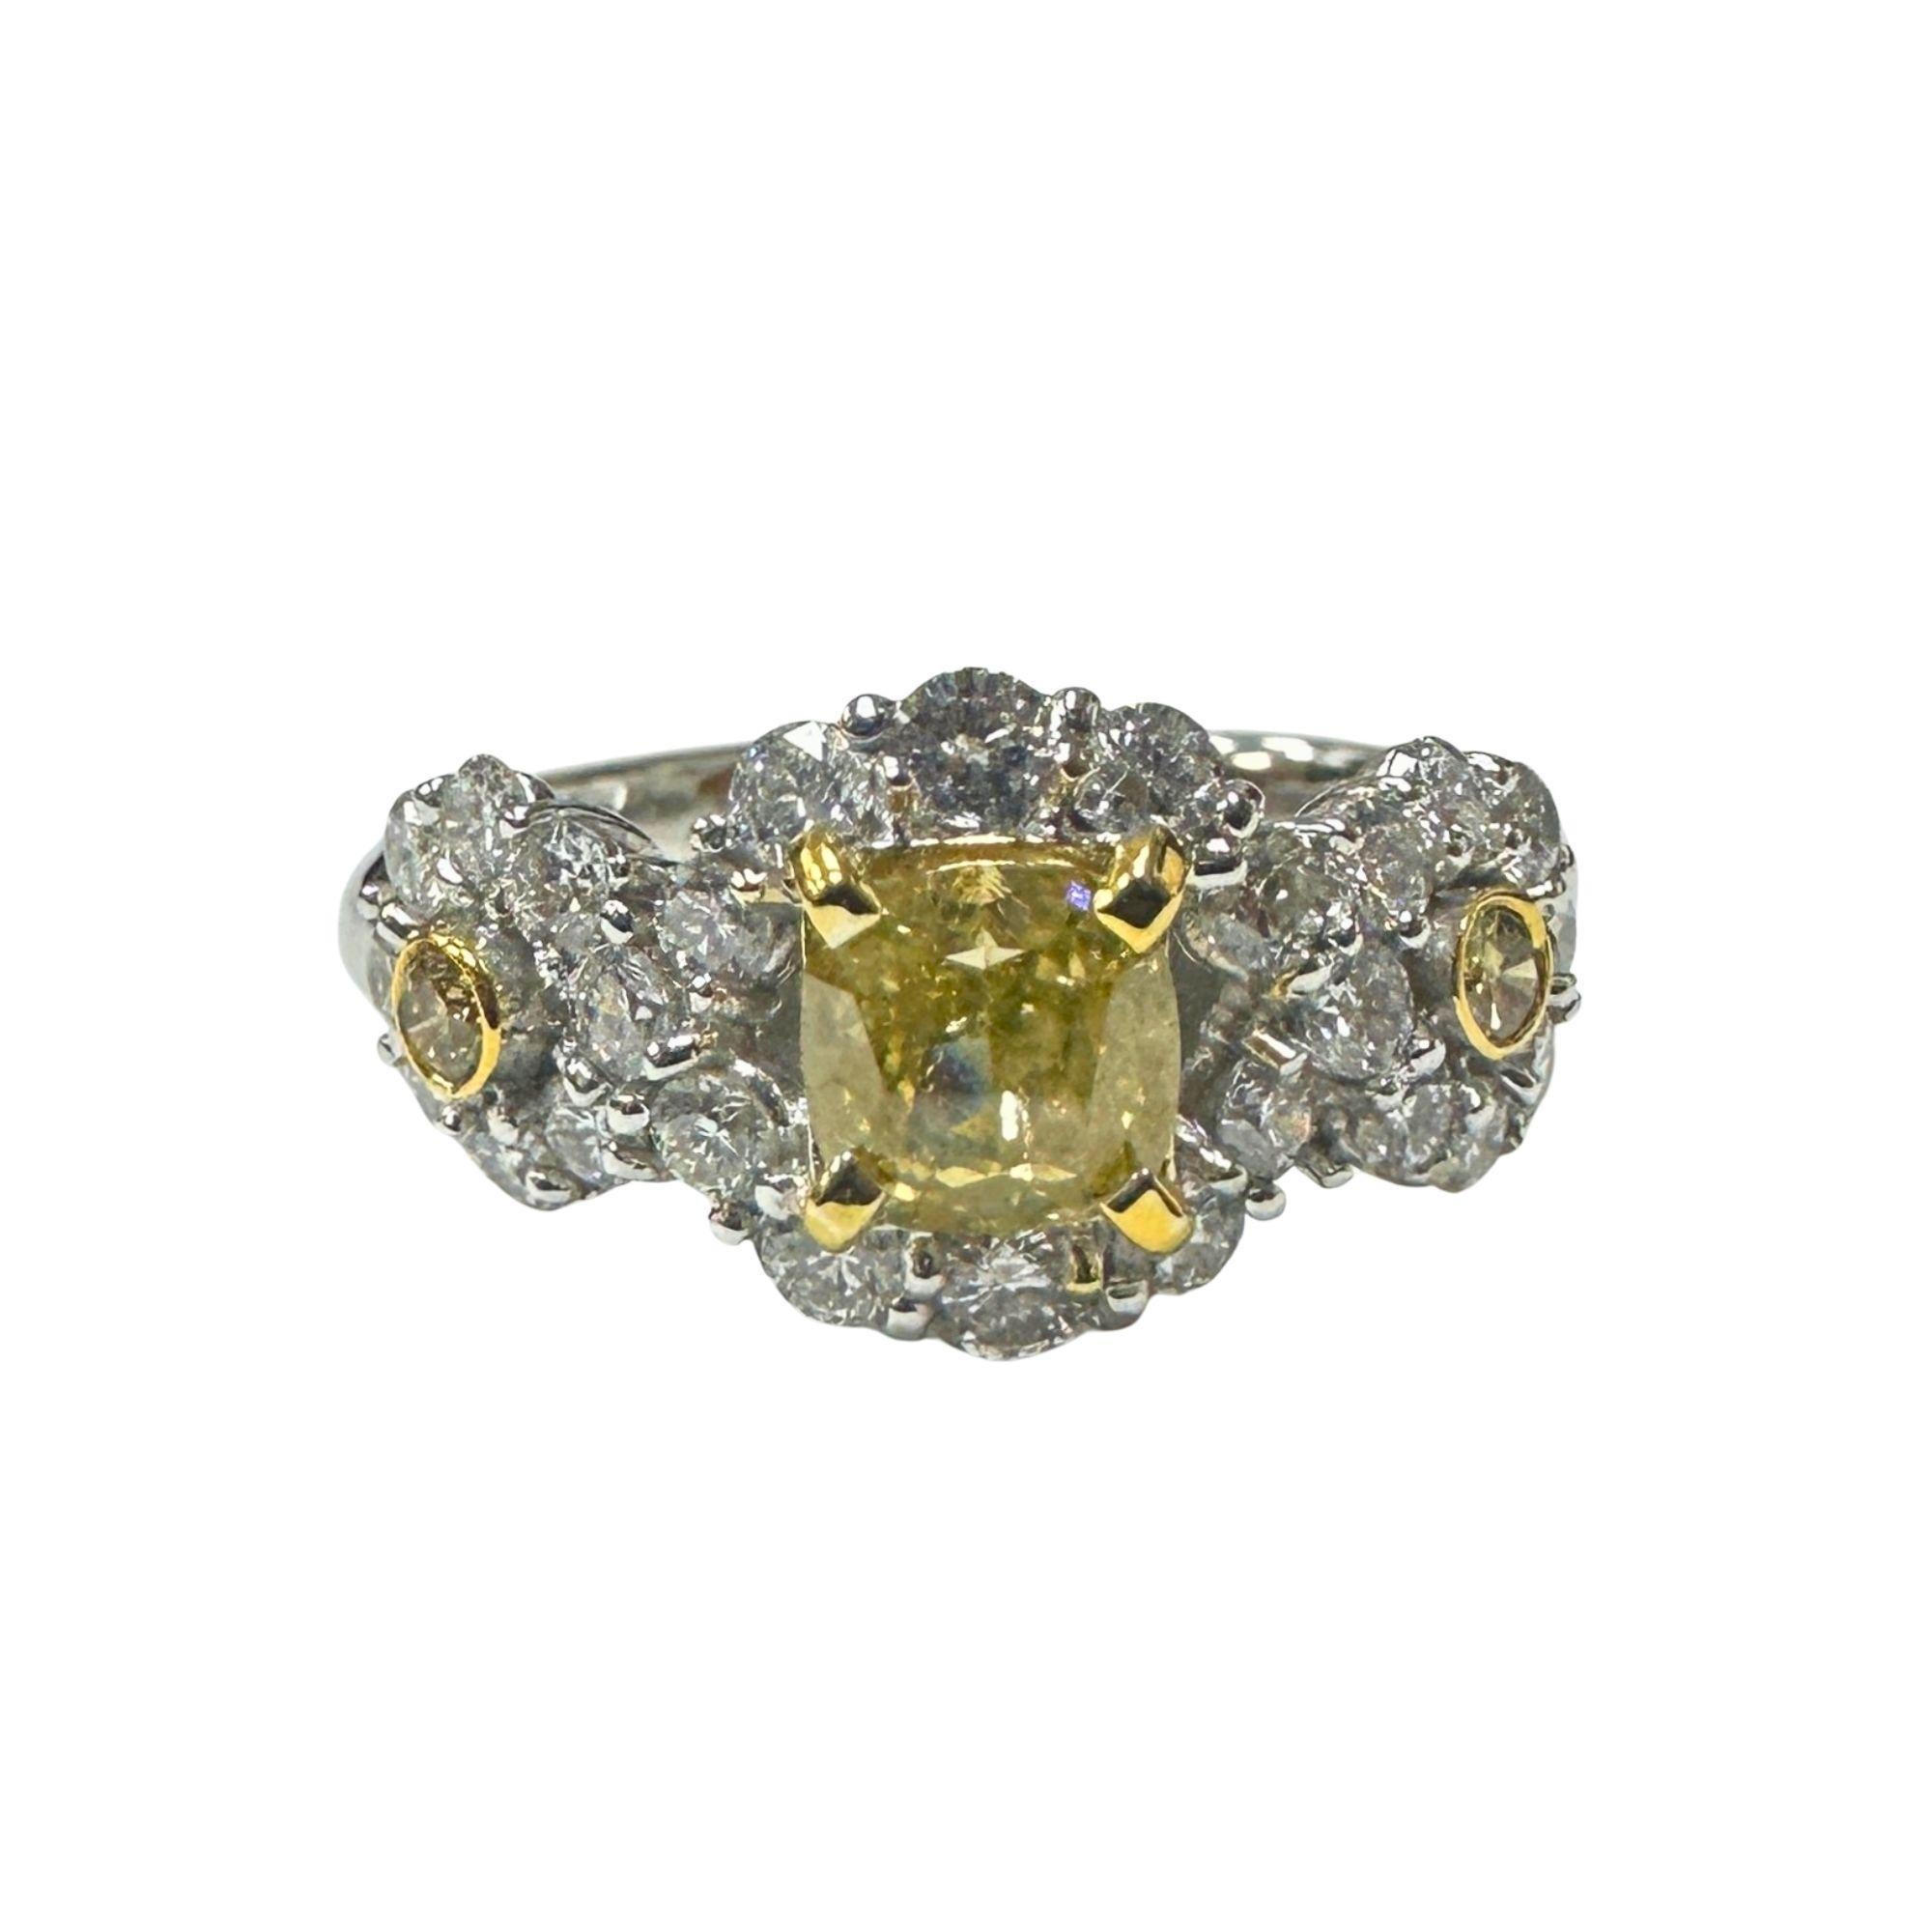 Look at this beautiful 18k White and Yellow Diamond Ring weighs 5.1 grams and size 6.25. The beautiful yellow diamonds are surrounded by white diamond weighing 1.48 carats. A stunning fusion of simplicity and beauty. 

18k White and Yellow Diamond